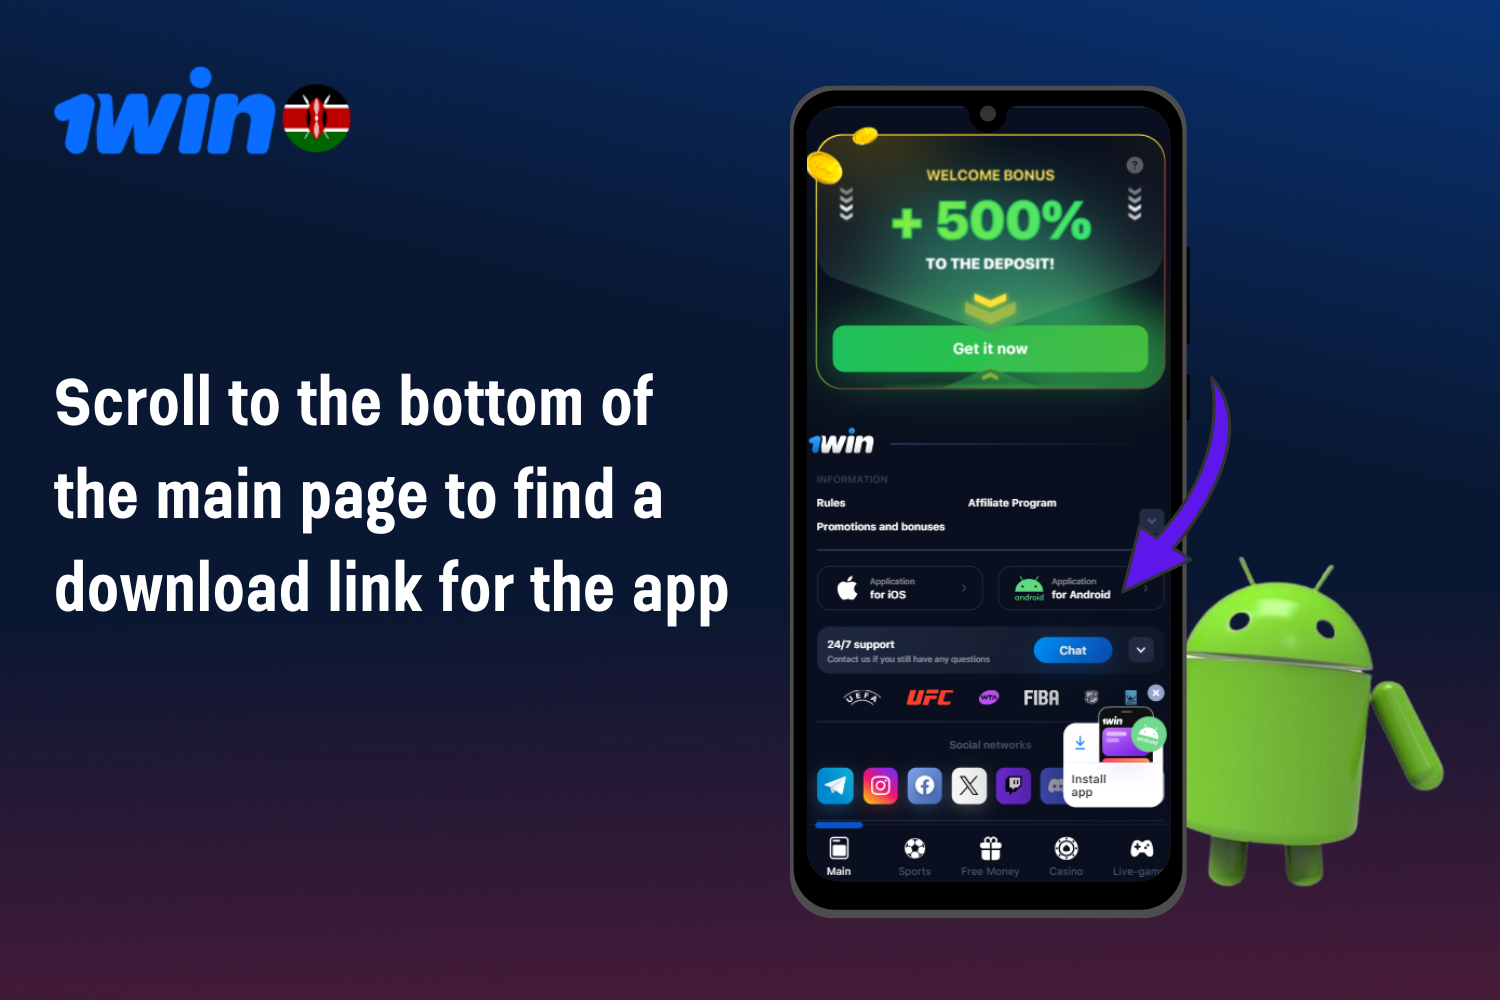 To download the application, users from Kenya need to scroll down the main page to find the link to download the application